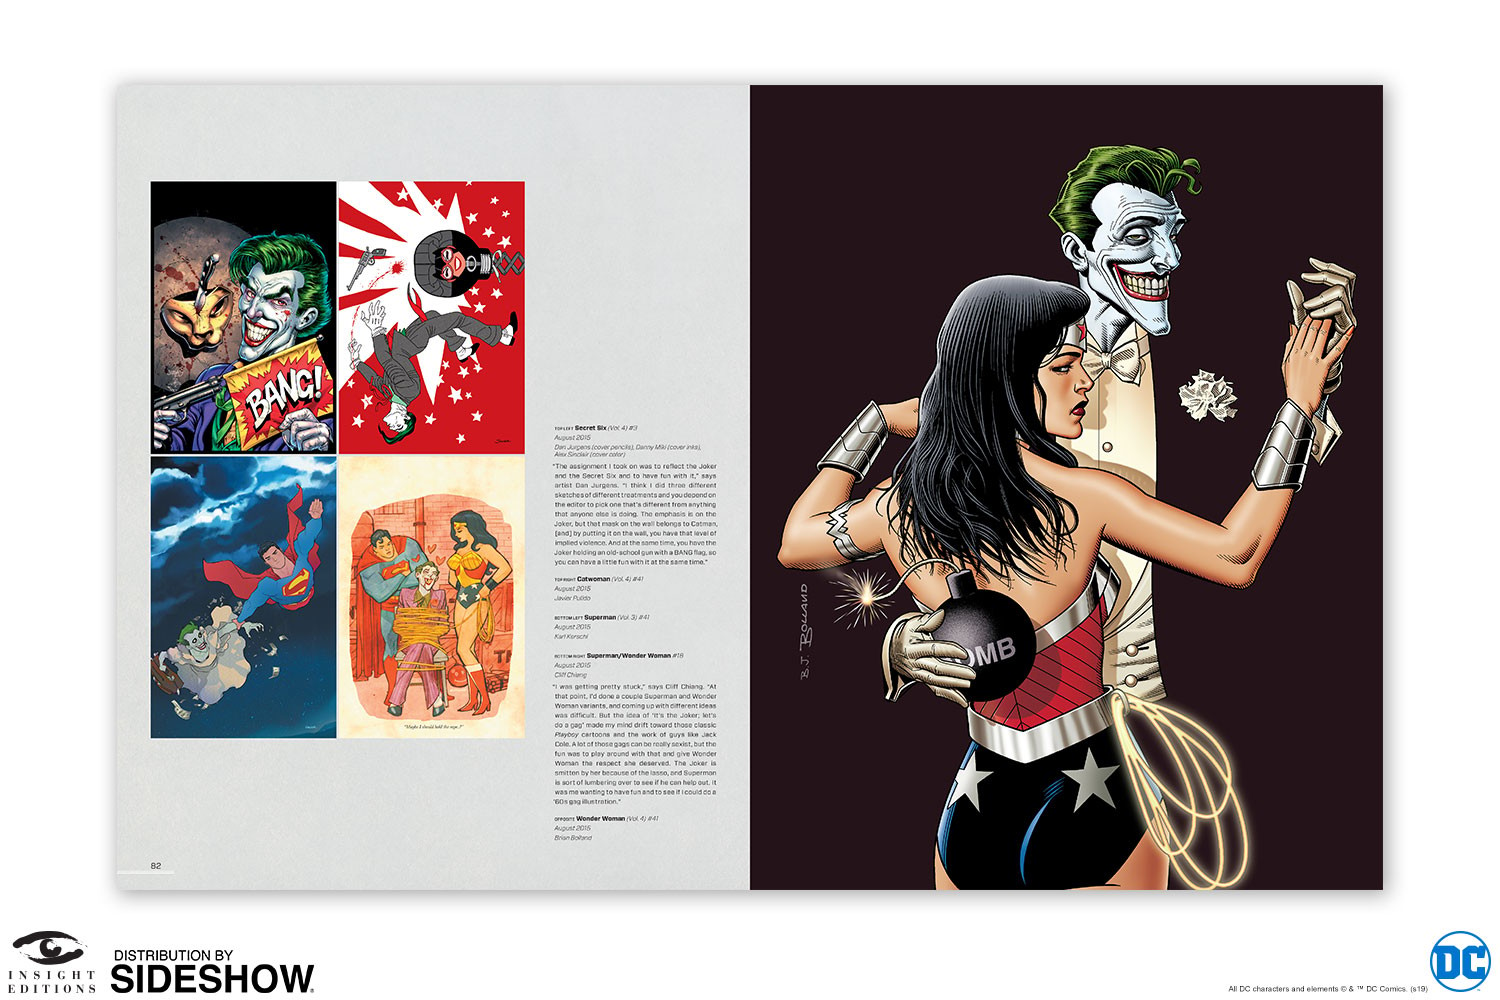 DC Comics Variant Covers: The Complete Visual History